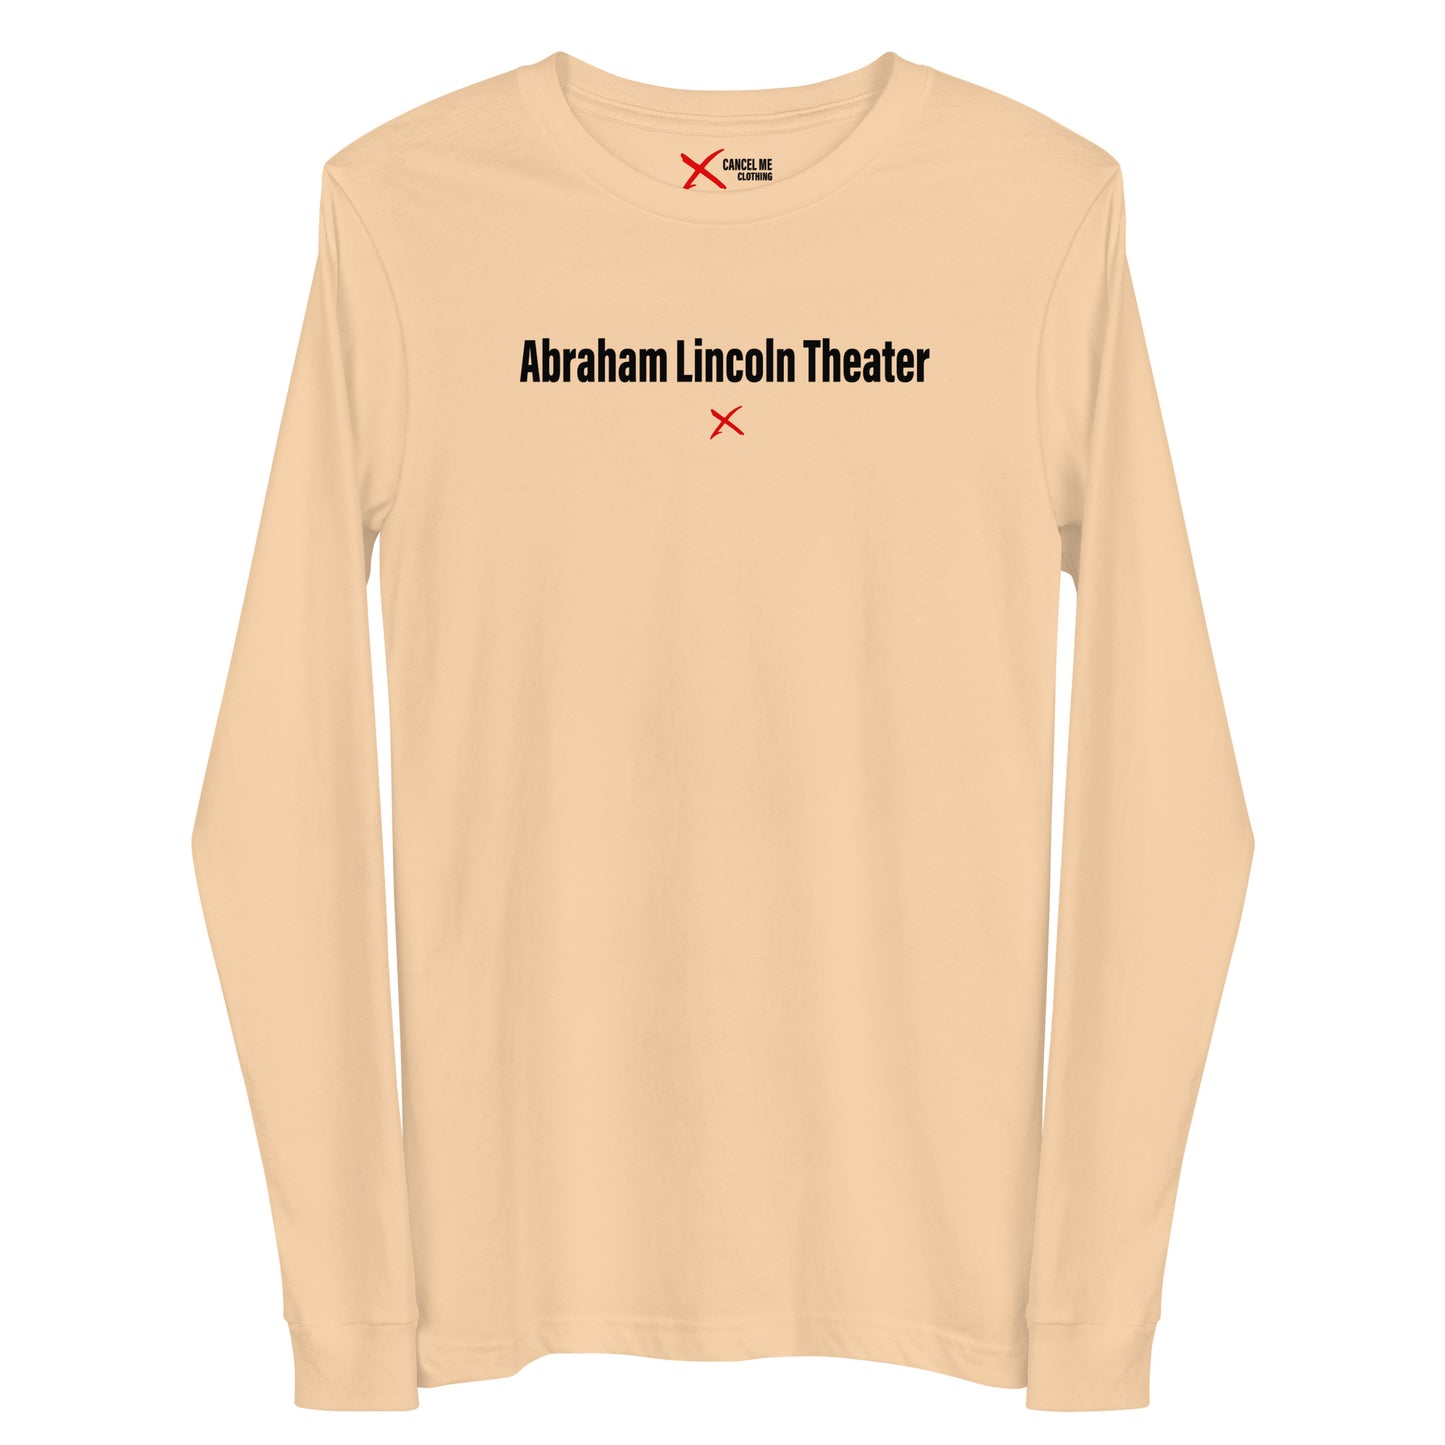 Abraham Lincoln Theater - Longsleeve